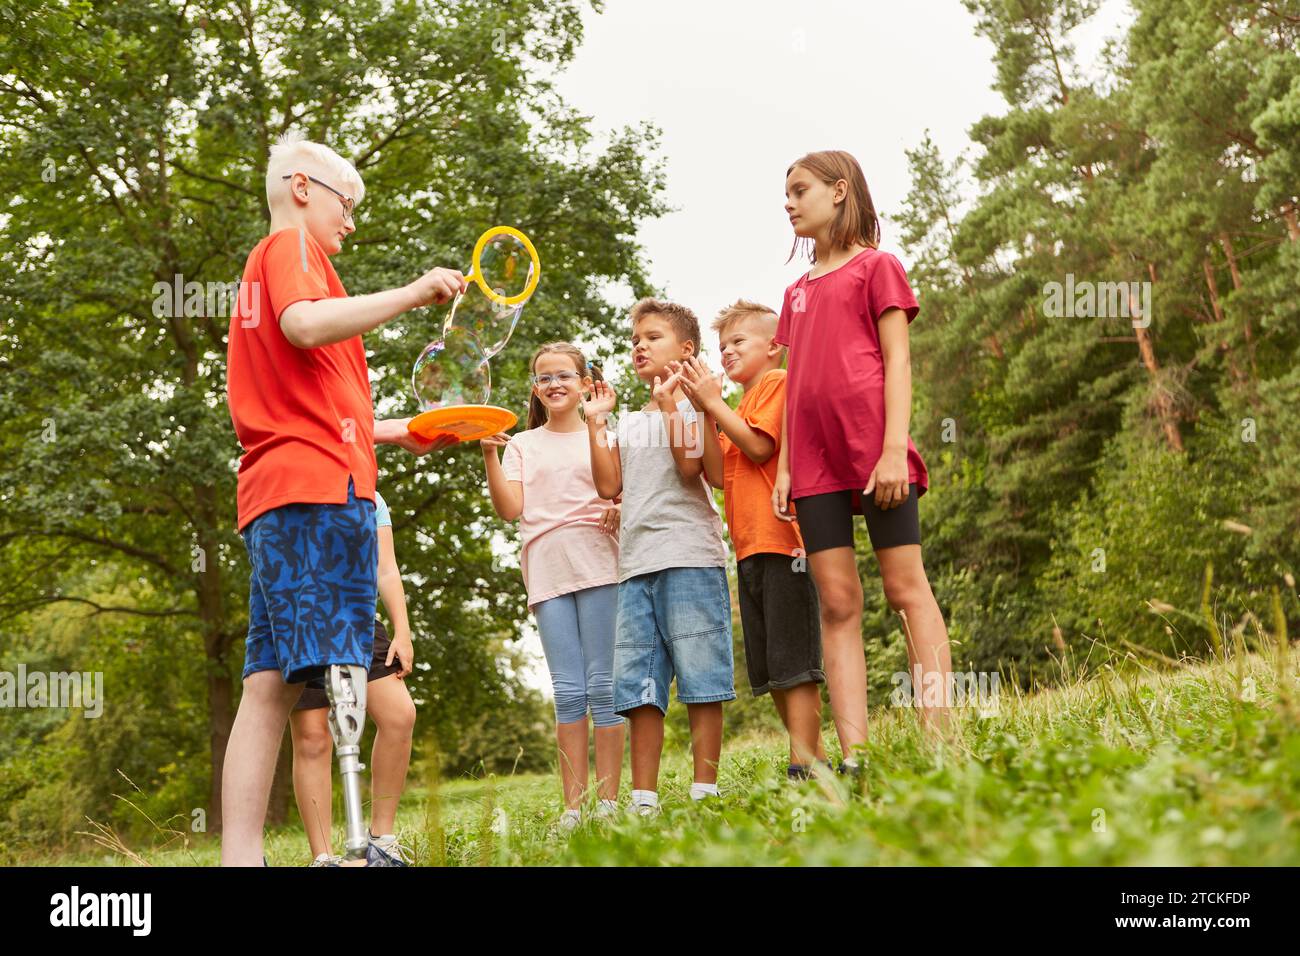 Friends having fun with disabled boy holding bubble wand at park Stock Photo